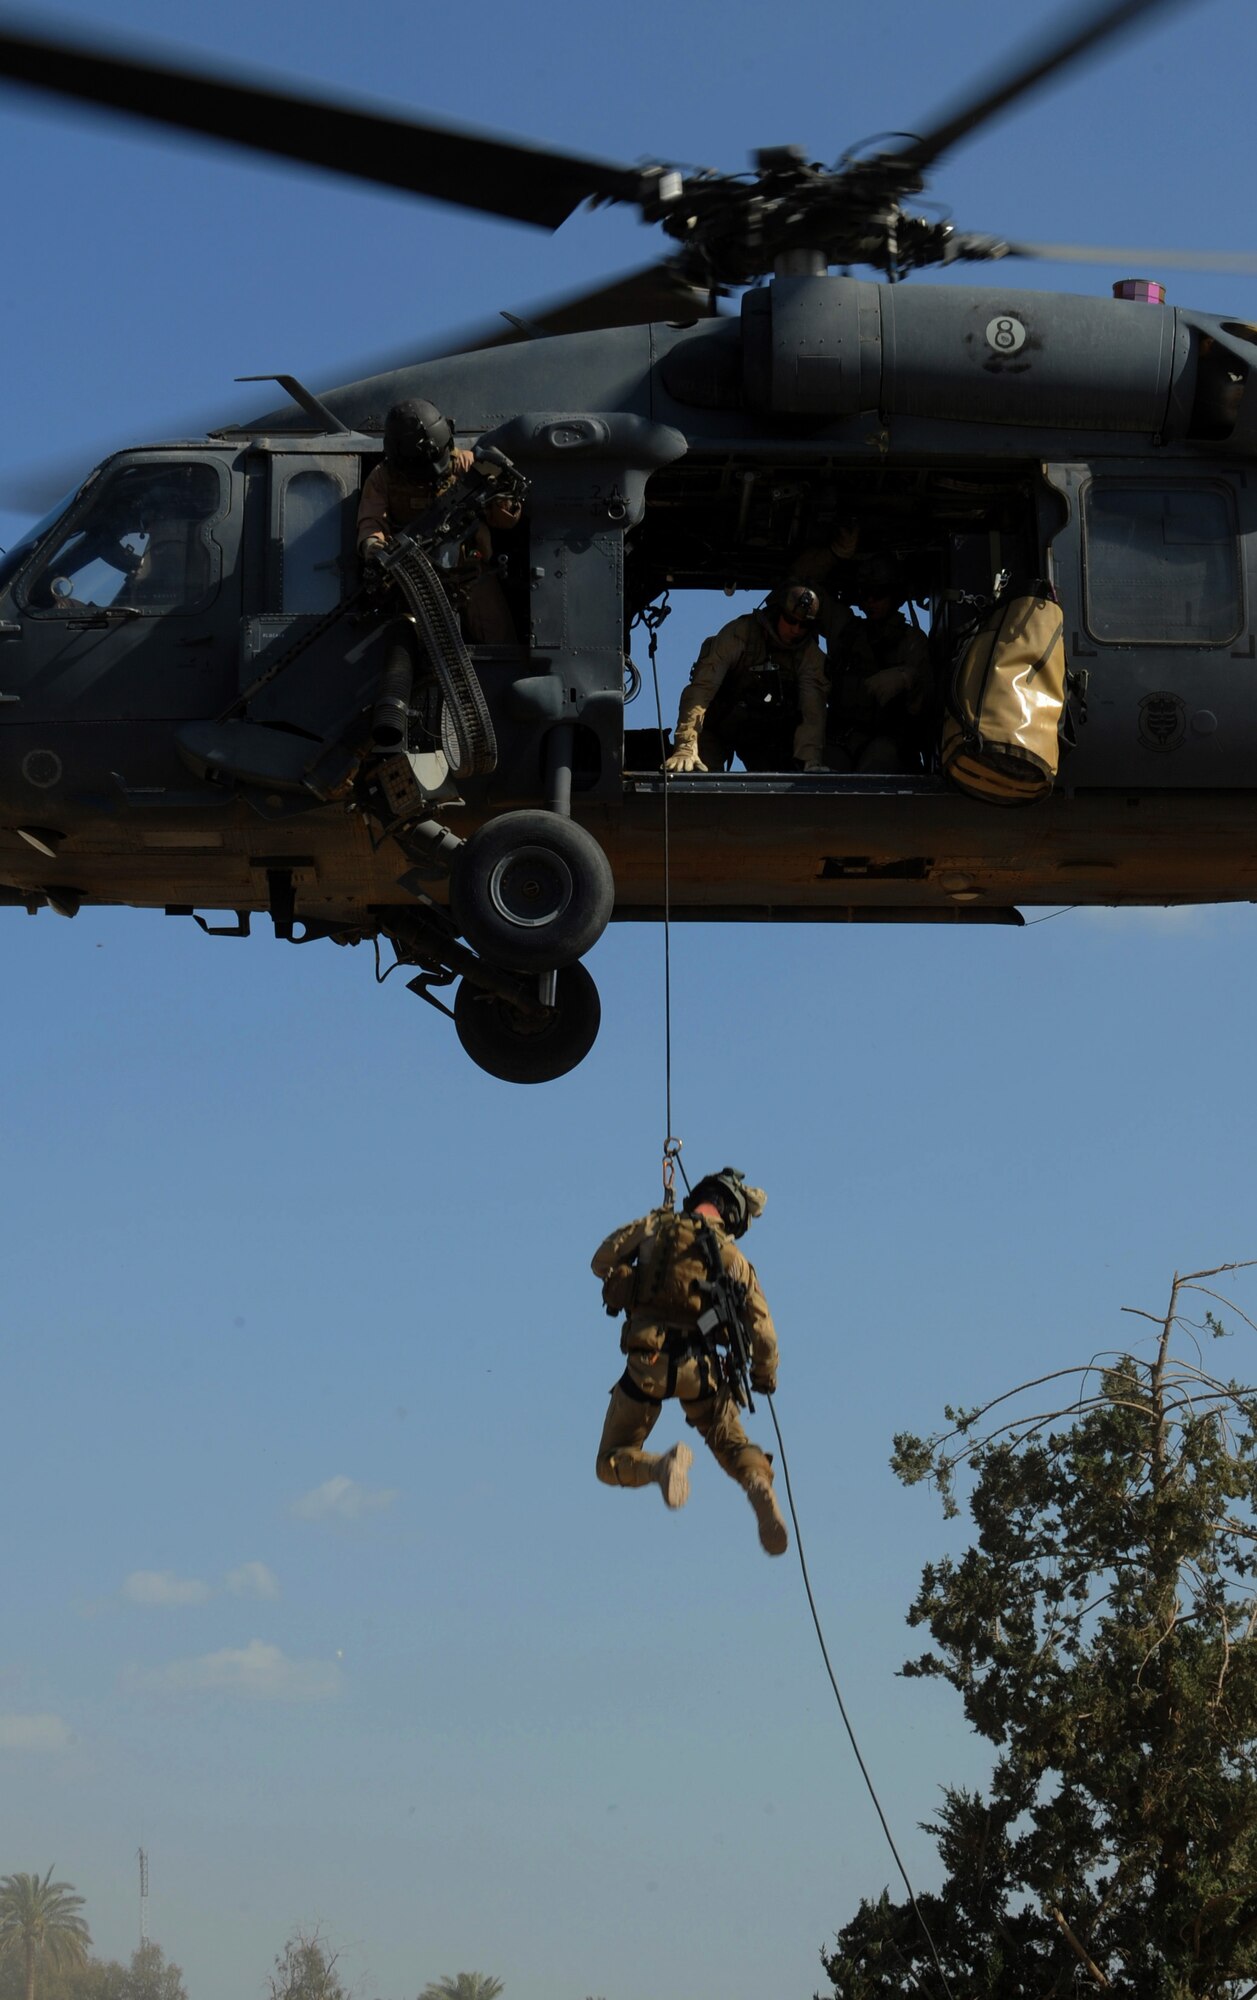 A U.S. Air Force Pararescueman from the 64th Expeditionary Rescue Squadron, Joint Base Balad, Iraq, repels from an HH-60 Pavehawk helicopter during proficiency training outside of Baghdad, Iraq, April 10, 2009, in support of Operation Iraqi Freedom.  (U.S. Air Force photo by Staff Sgt. James L. Harper Jr.)